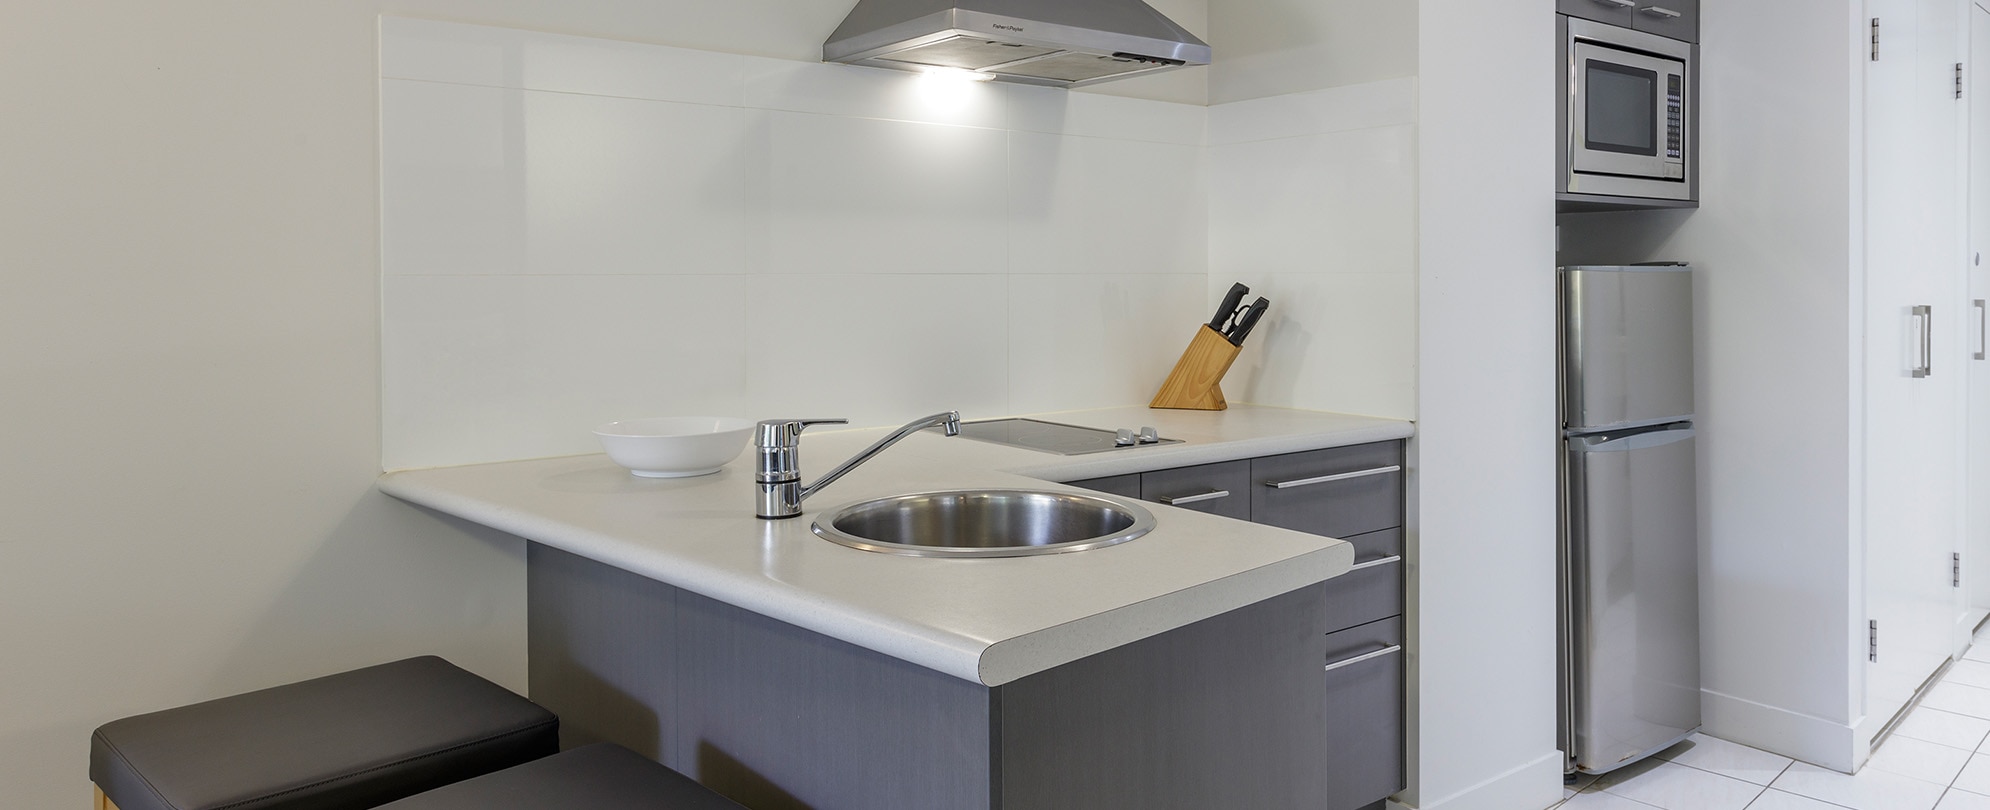 The kitchen of a 1-bedroom suite at Club Wyndham Coffs Harbor.